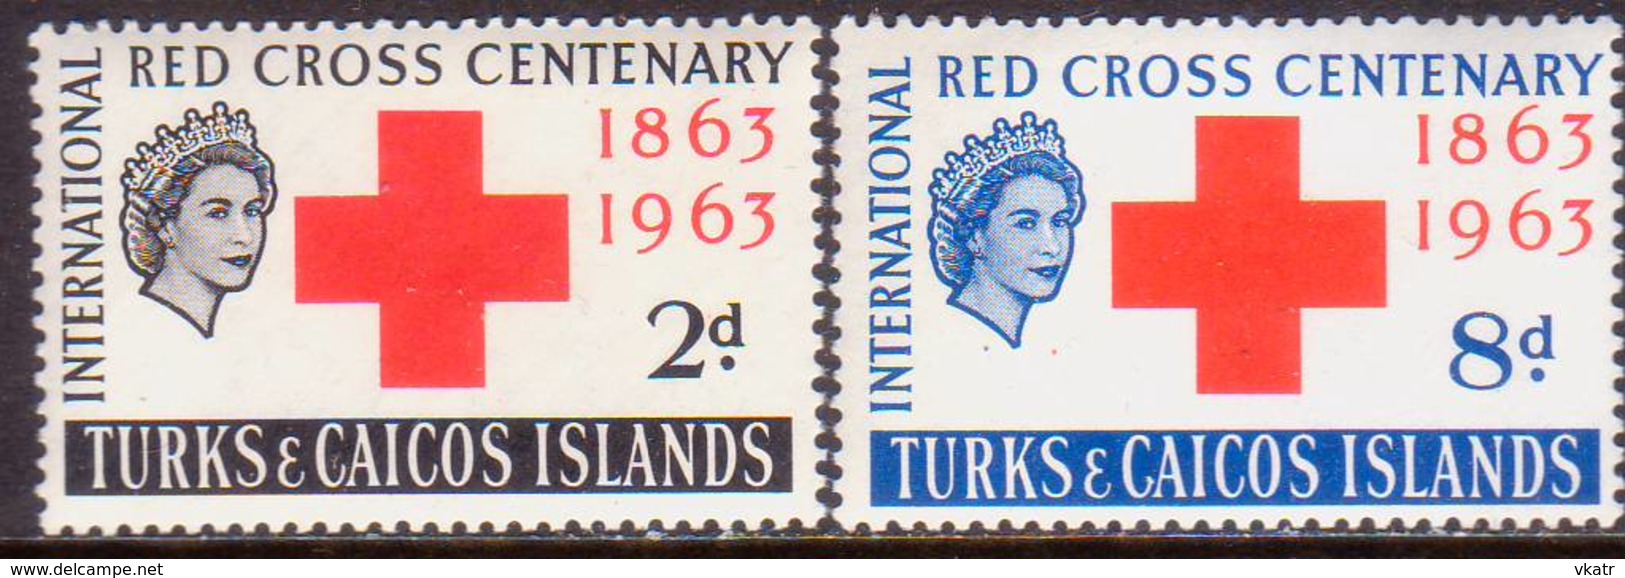 TURKS AND CAICOS ISLANDS 1963 SG #255-56 Compl.set MLH Red Cross - Turks And Caicos